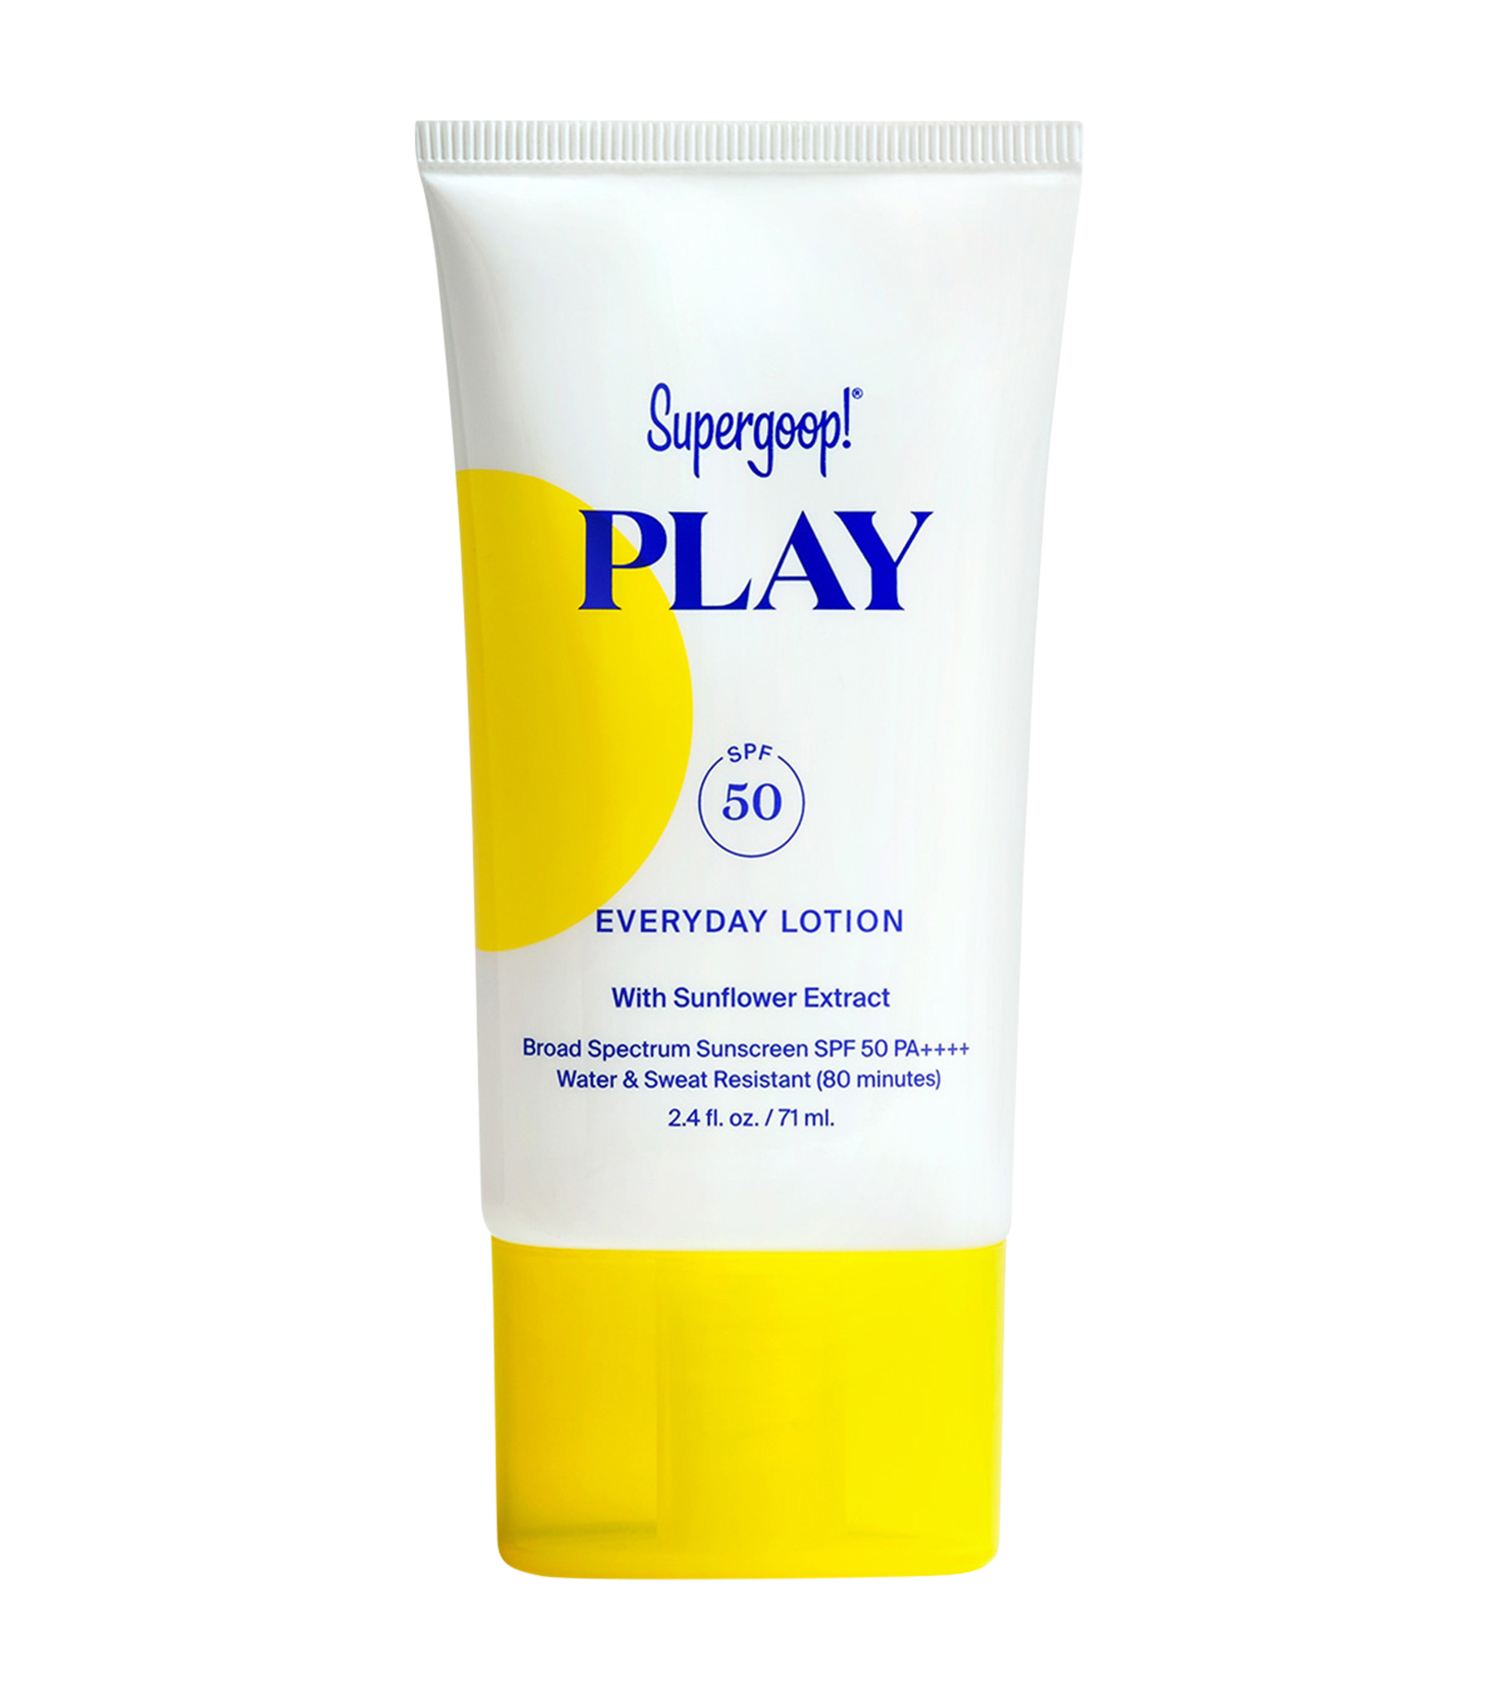 PLAY Everyday Lotion SPF 50 with Sunflower Extract PLAY Everyday Lotion SPF 50 with Sunflower Extract 1